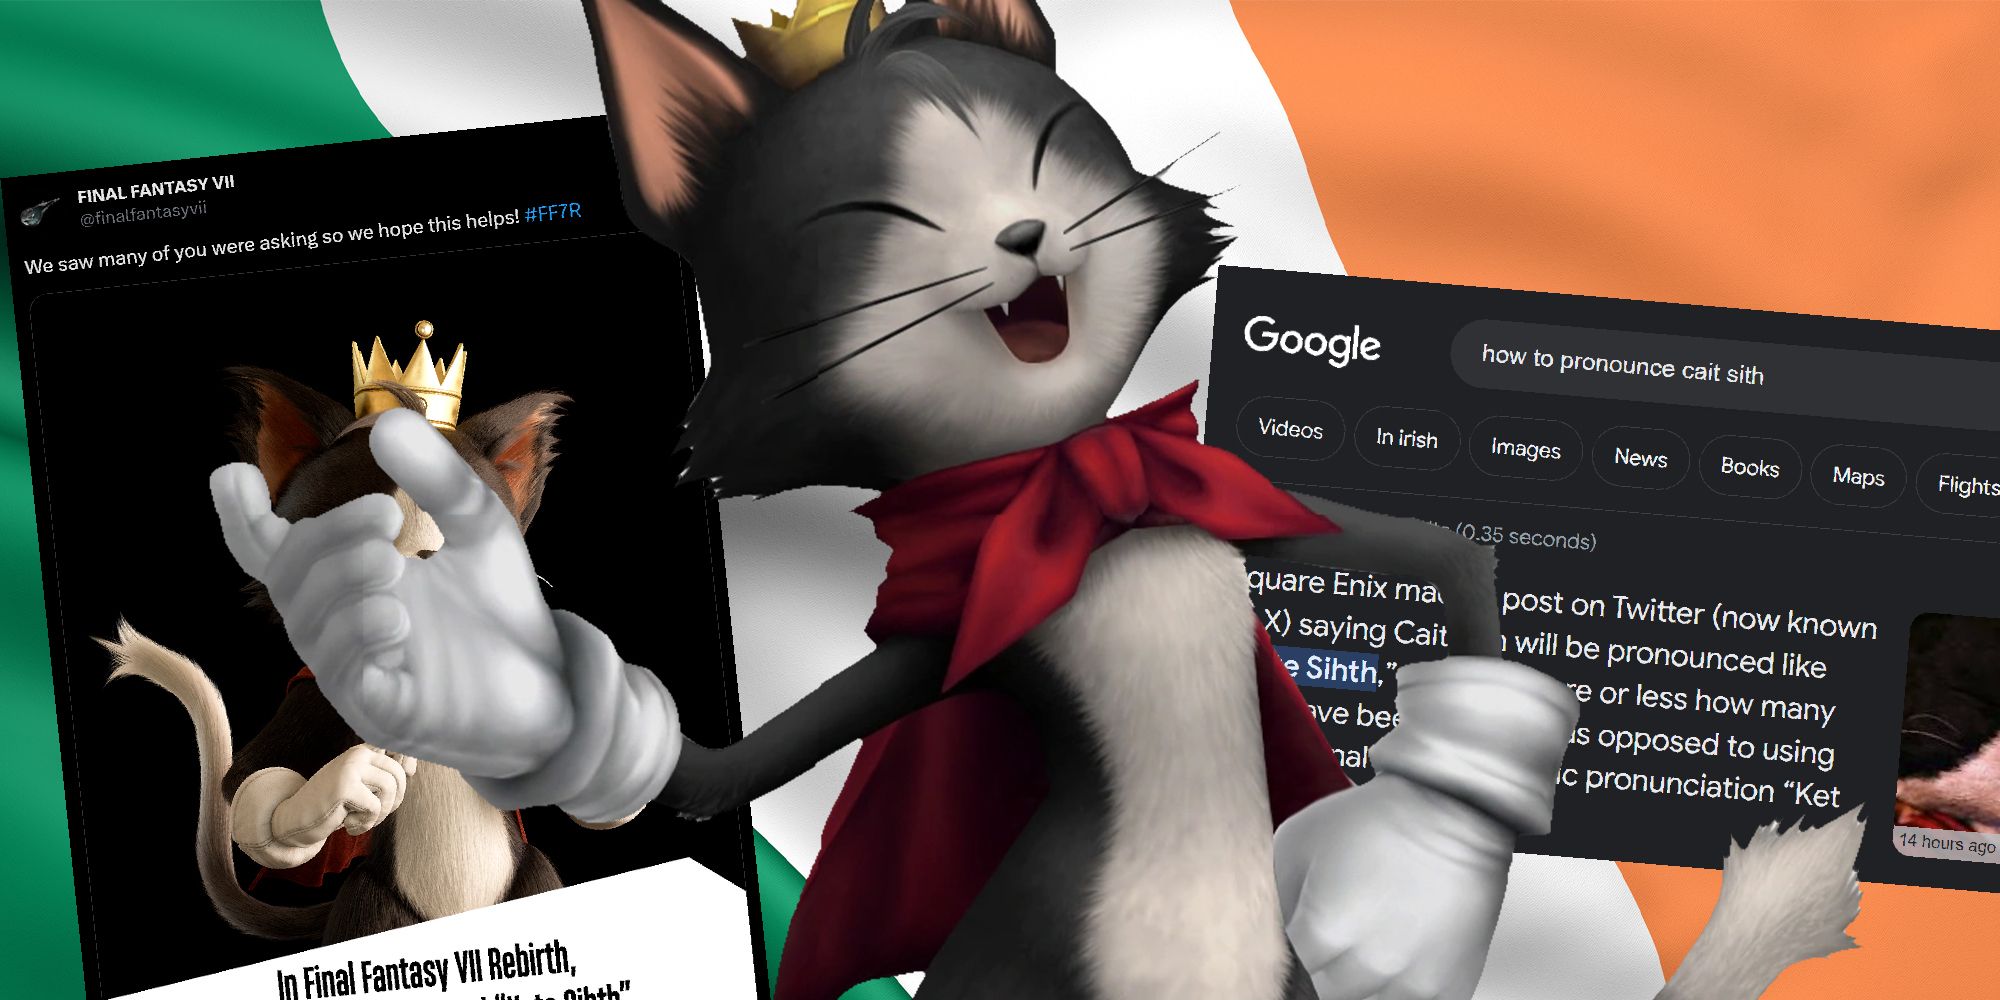 No, That’s Not How You Pronounce Cait Sith